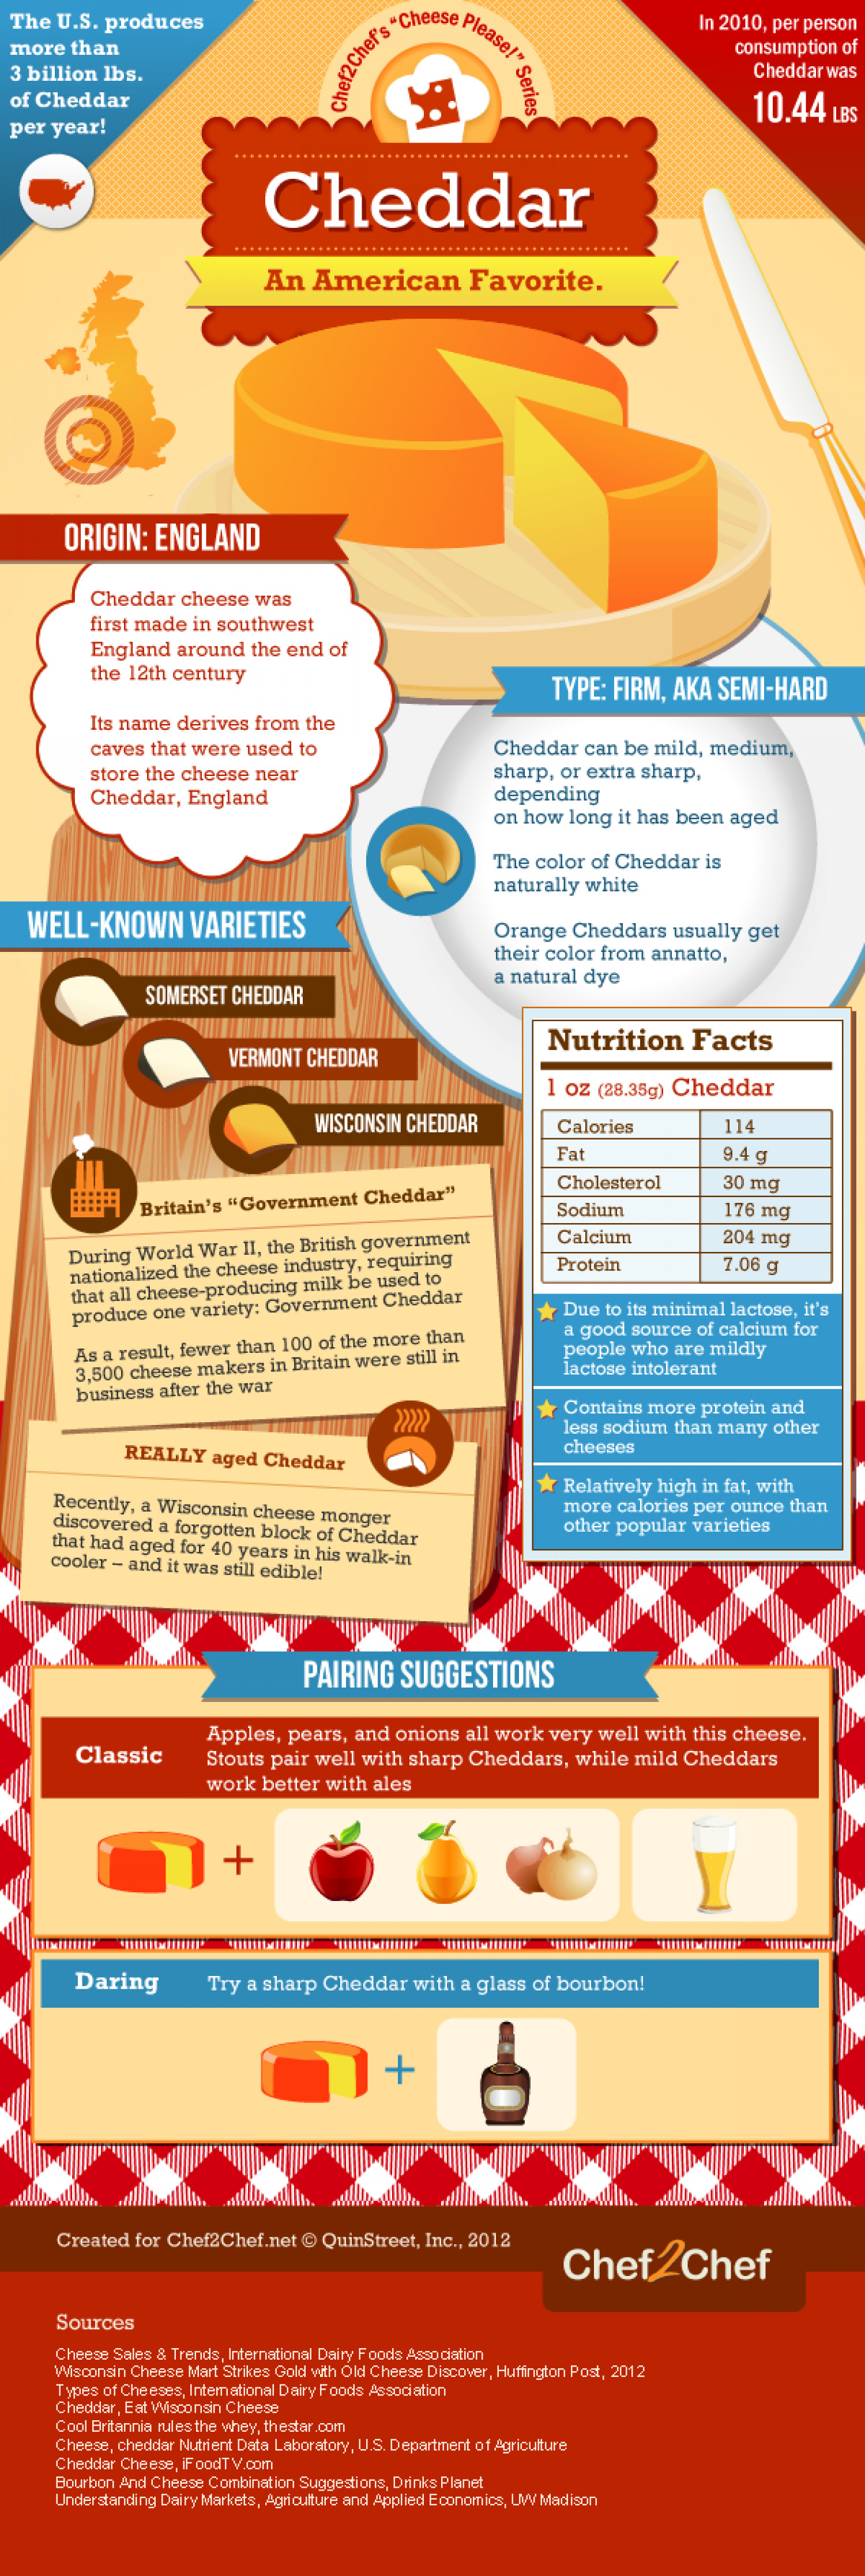 Cheddar An American Favorite Infographic